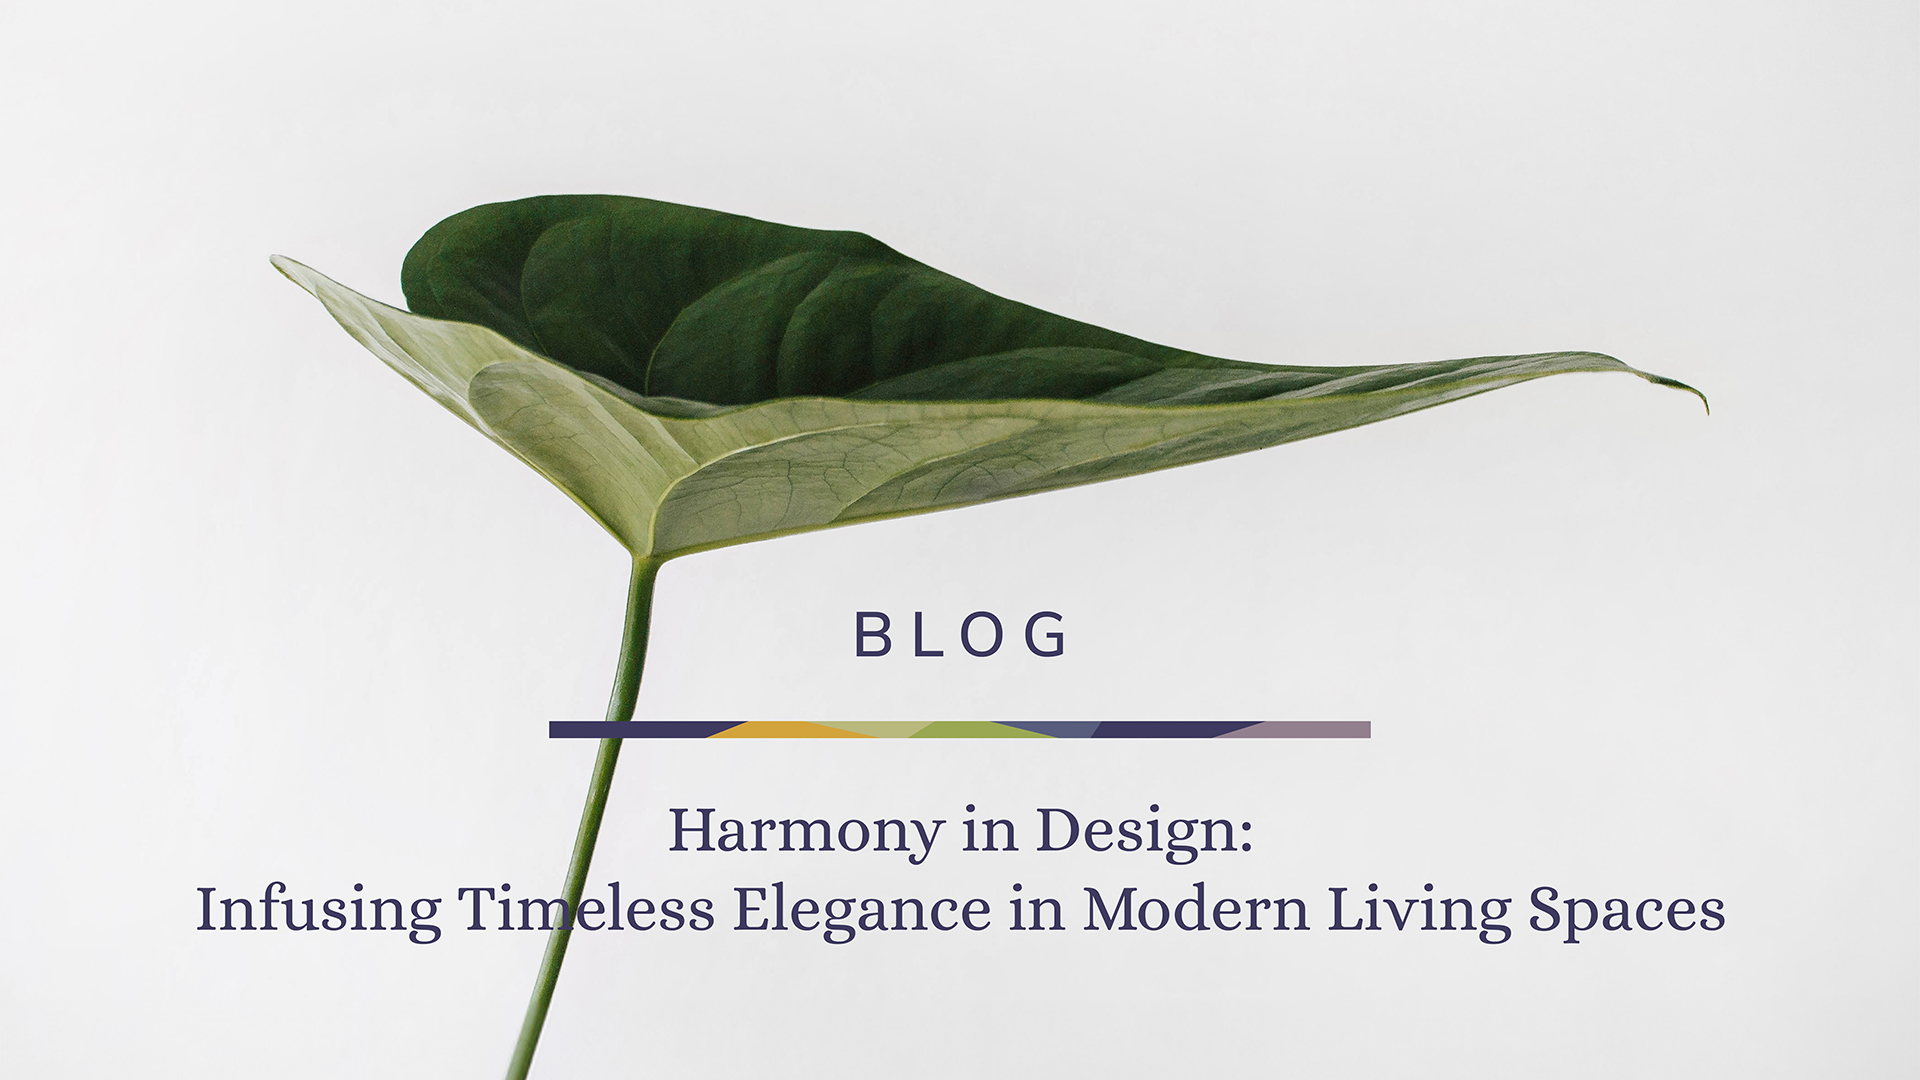 Harmony in design: Infusing timeless elegance in modern living spaces